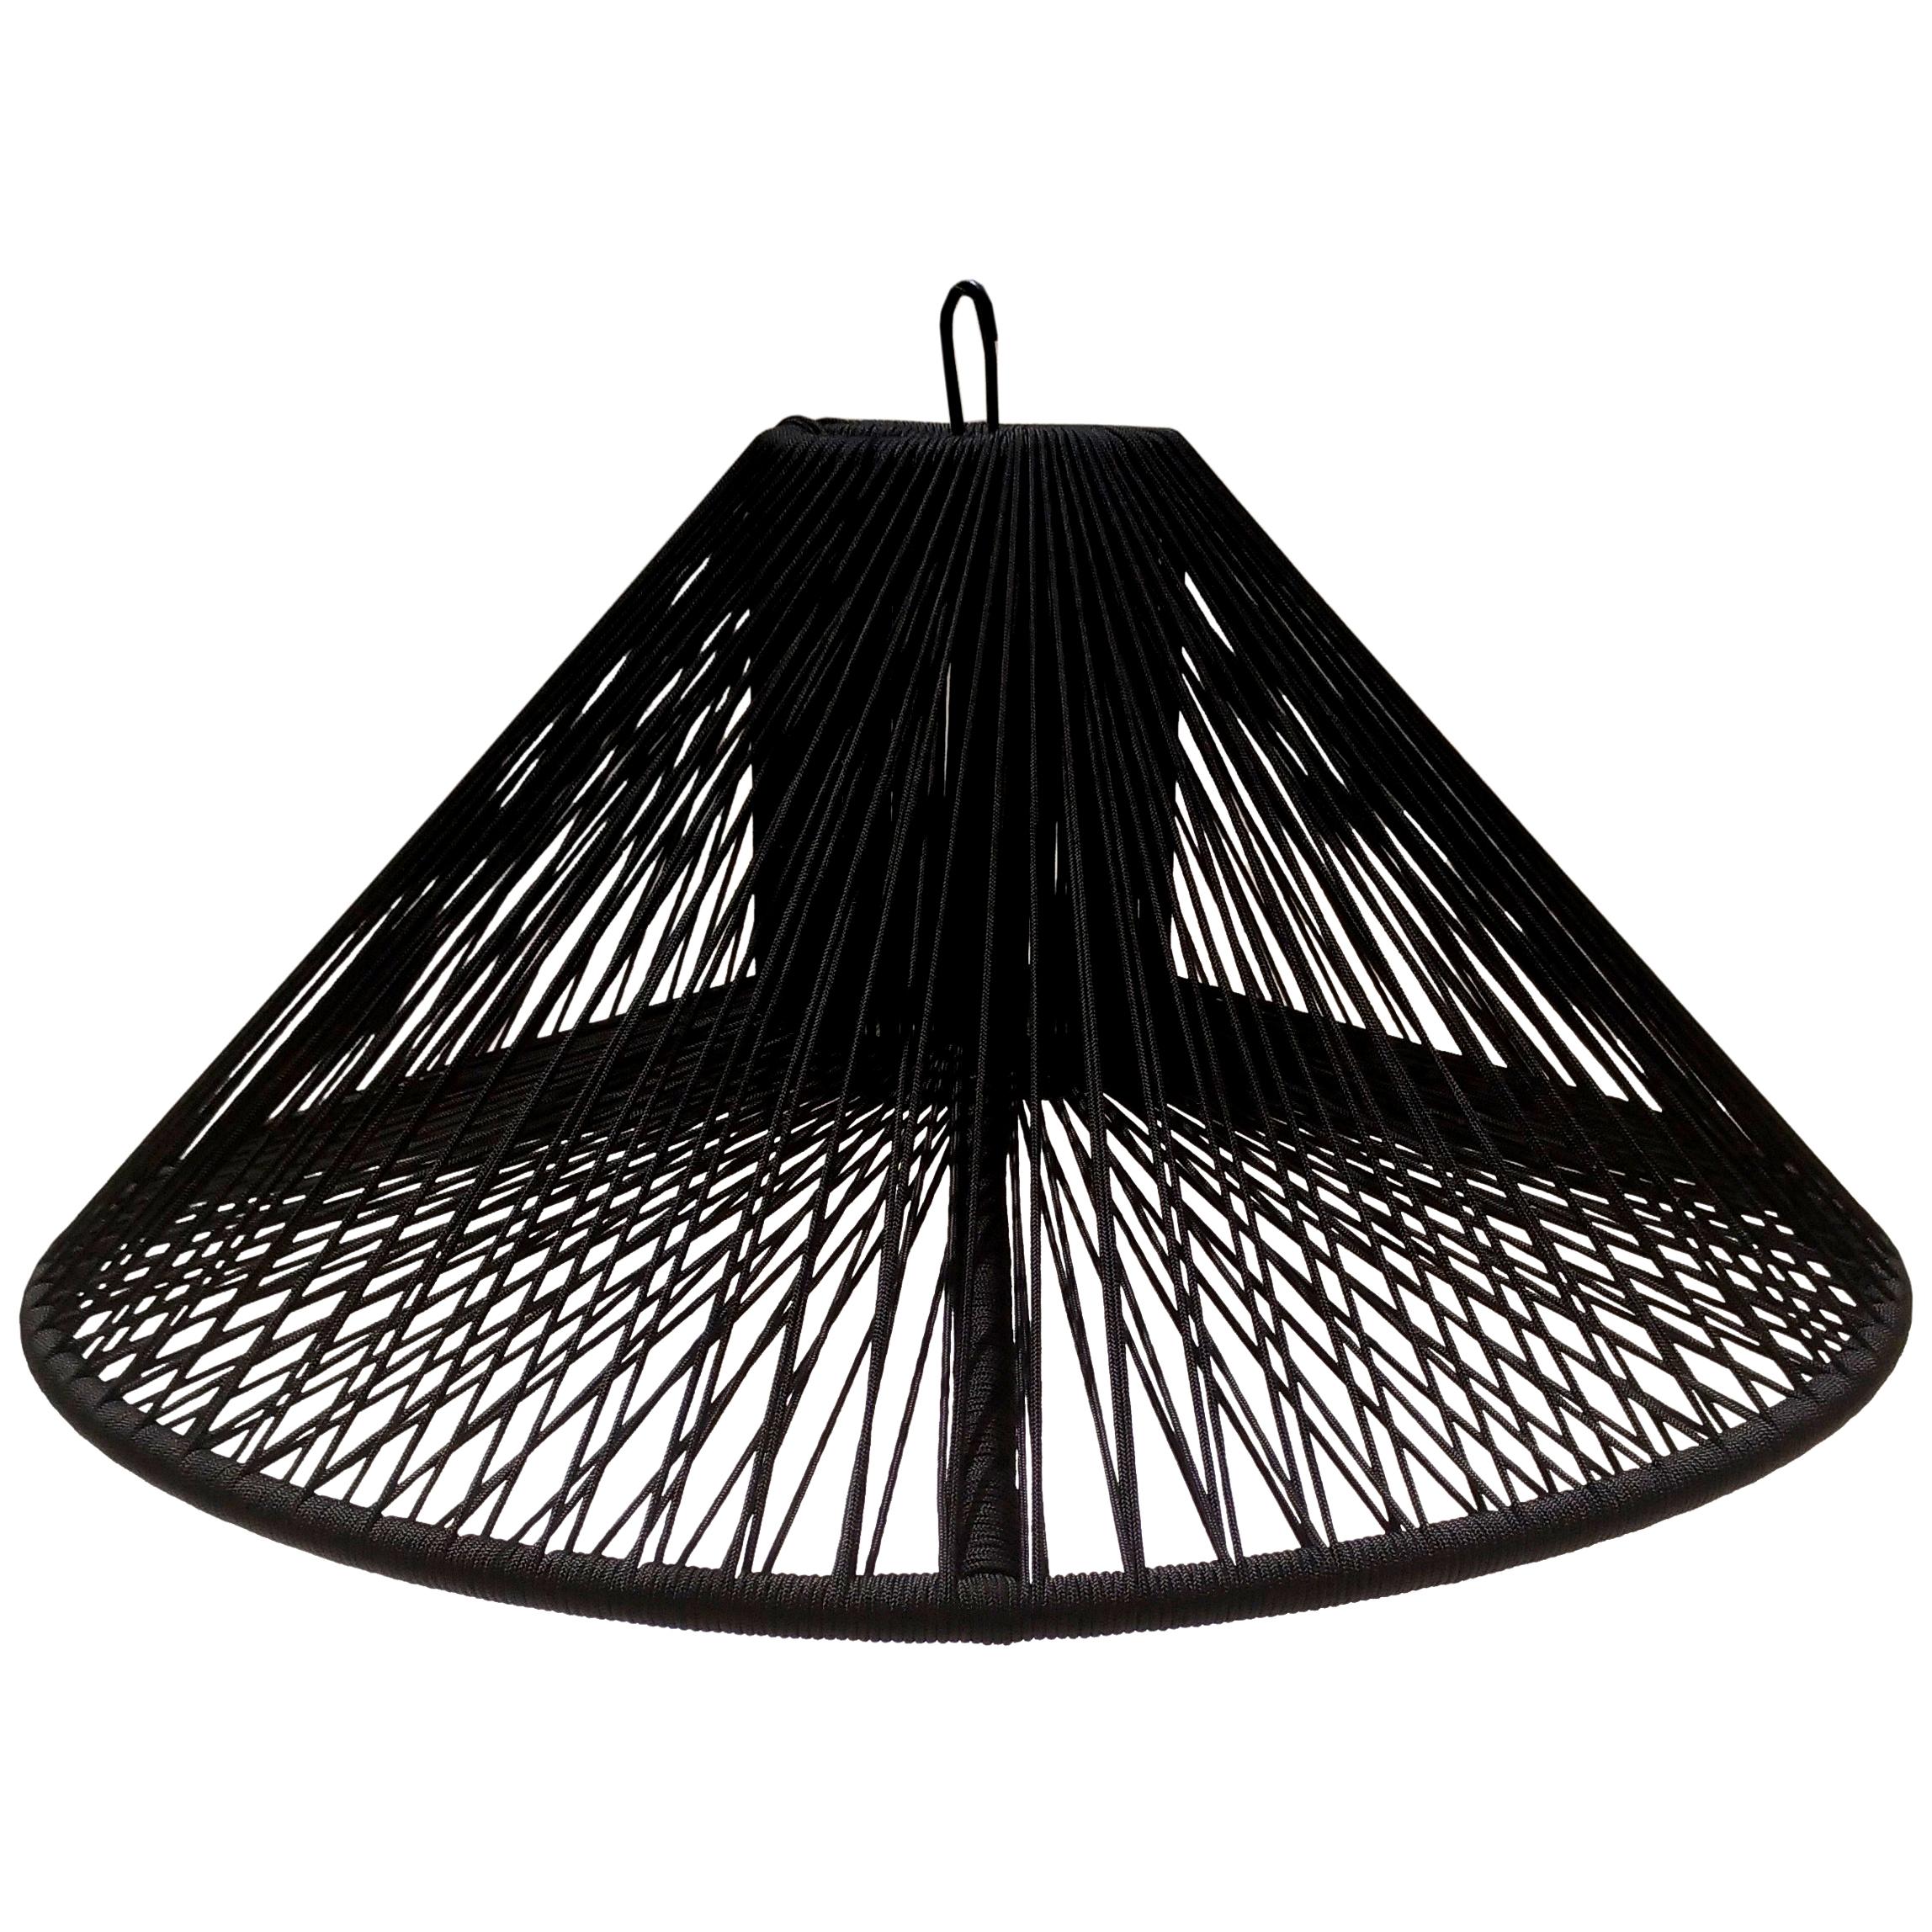 Caturité lamp in steel or stainless steel made with nautical rope.
  